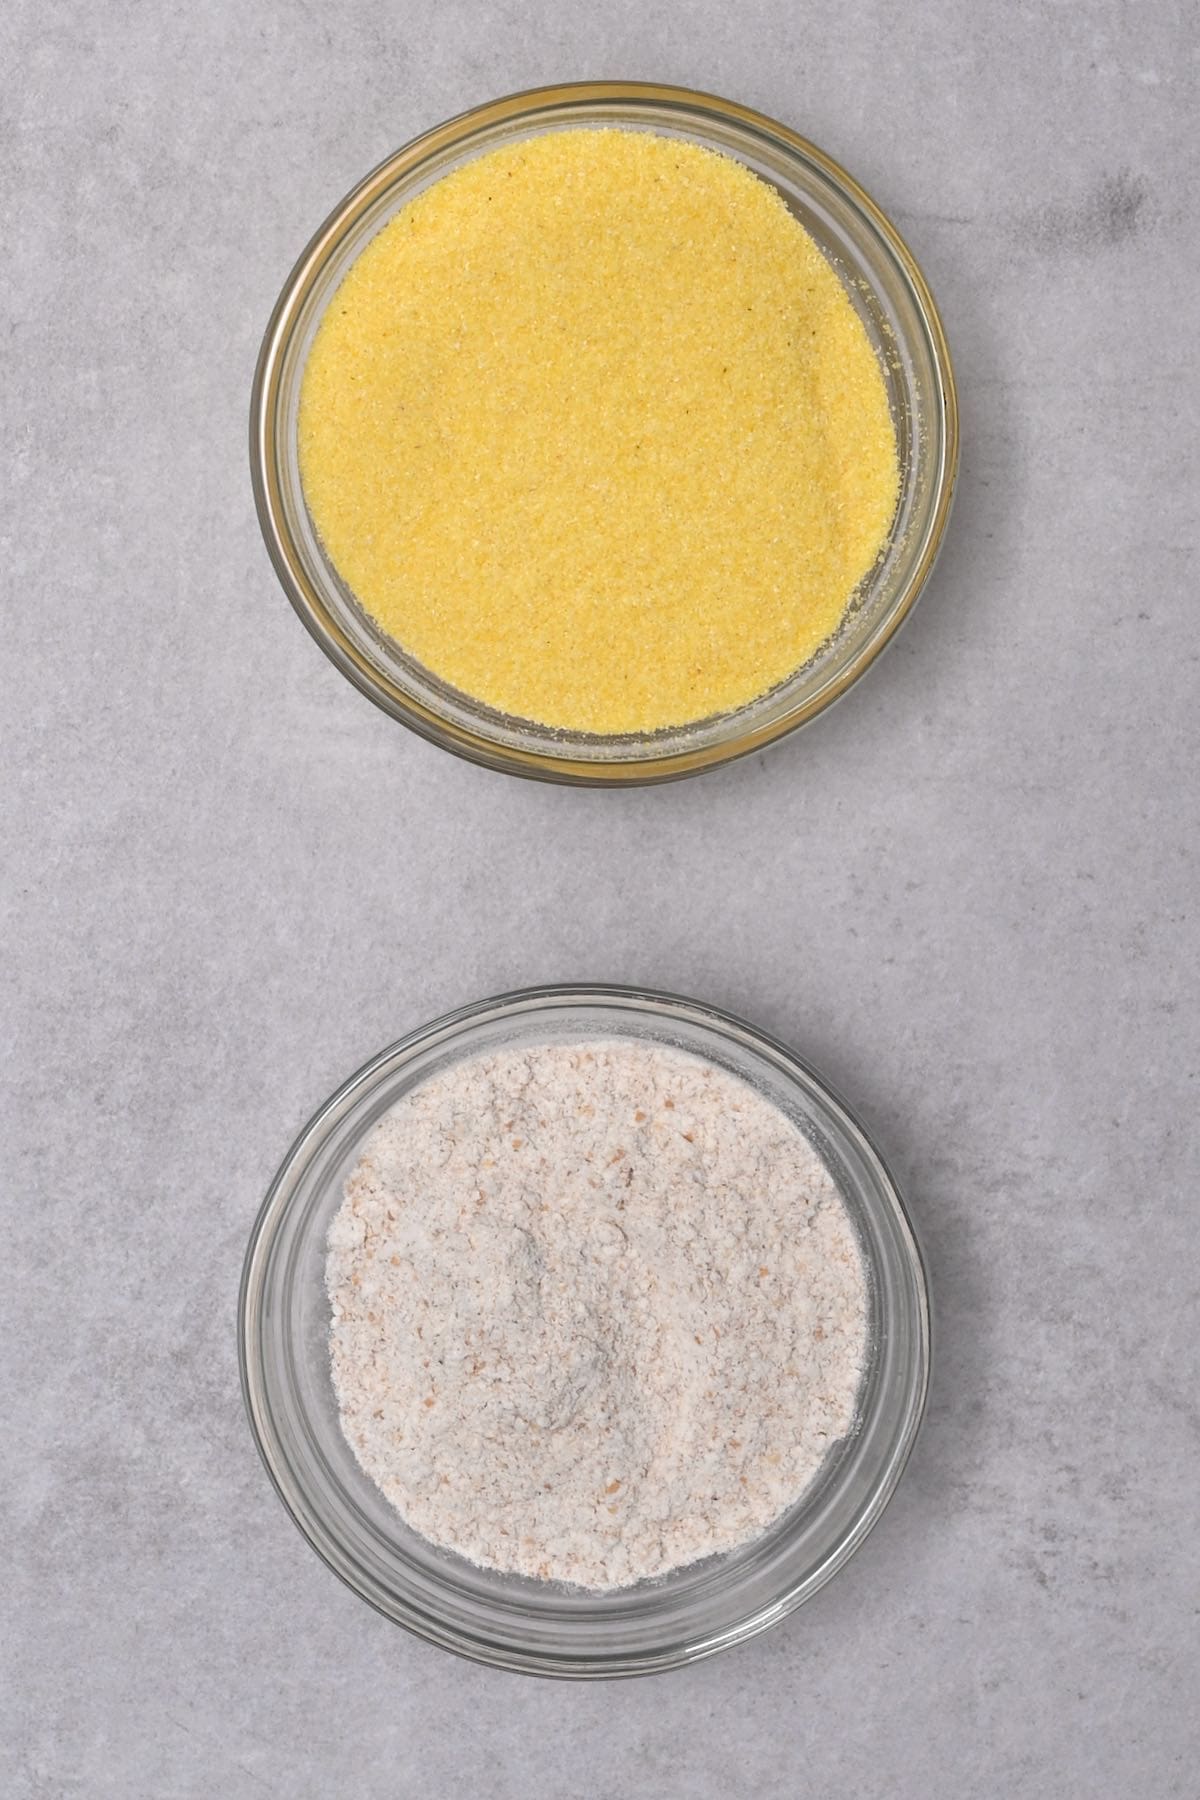 wholemeal flour next to cornmeal in glass bowl